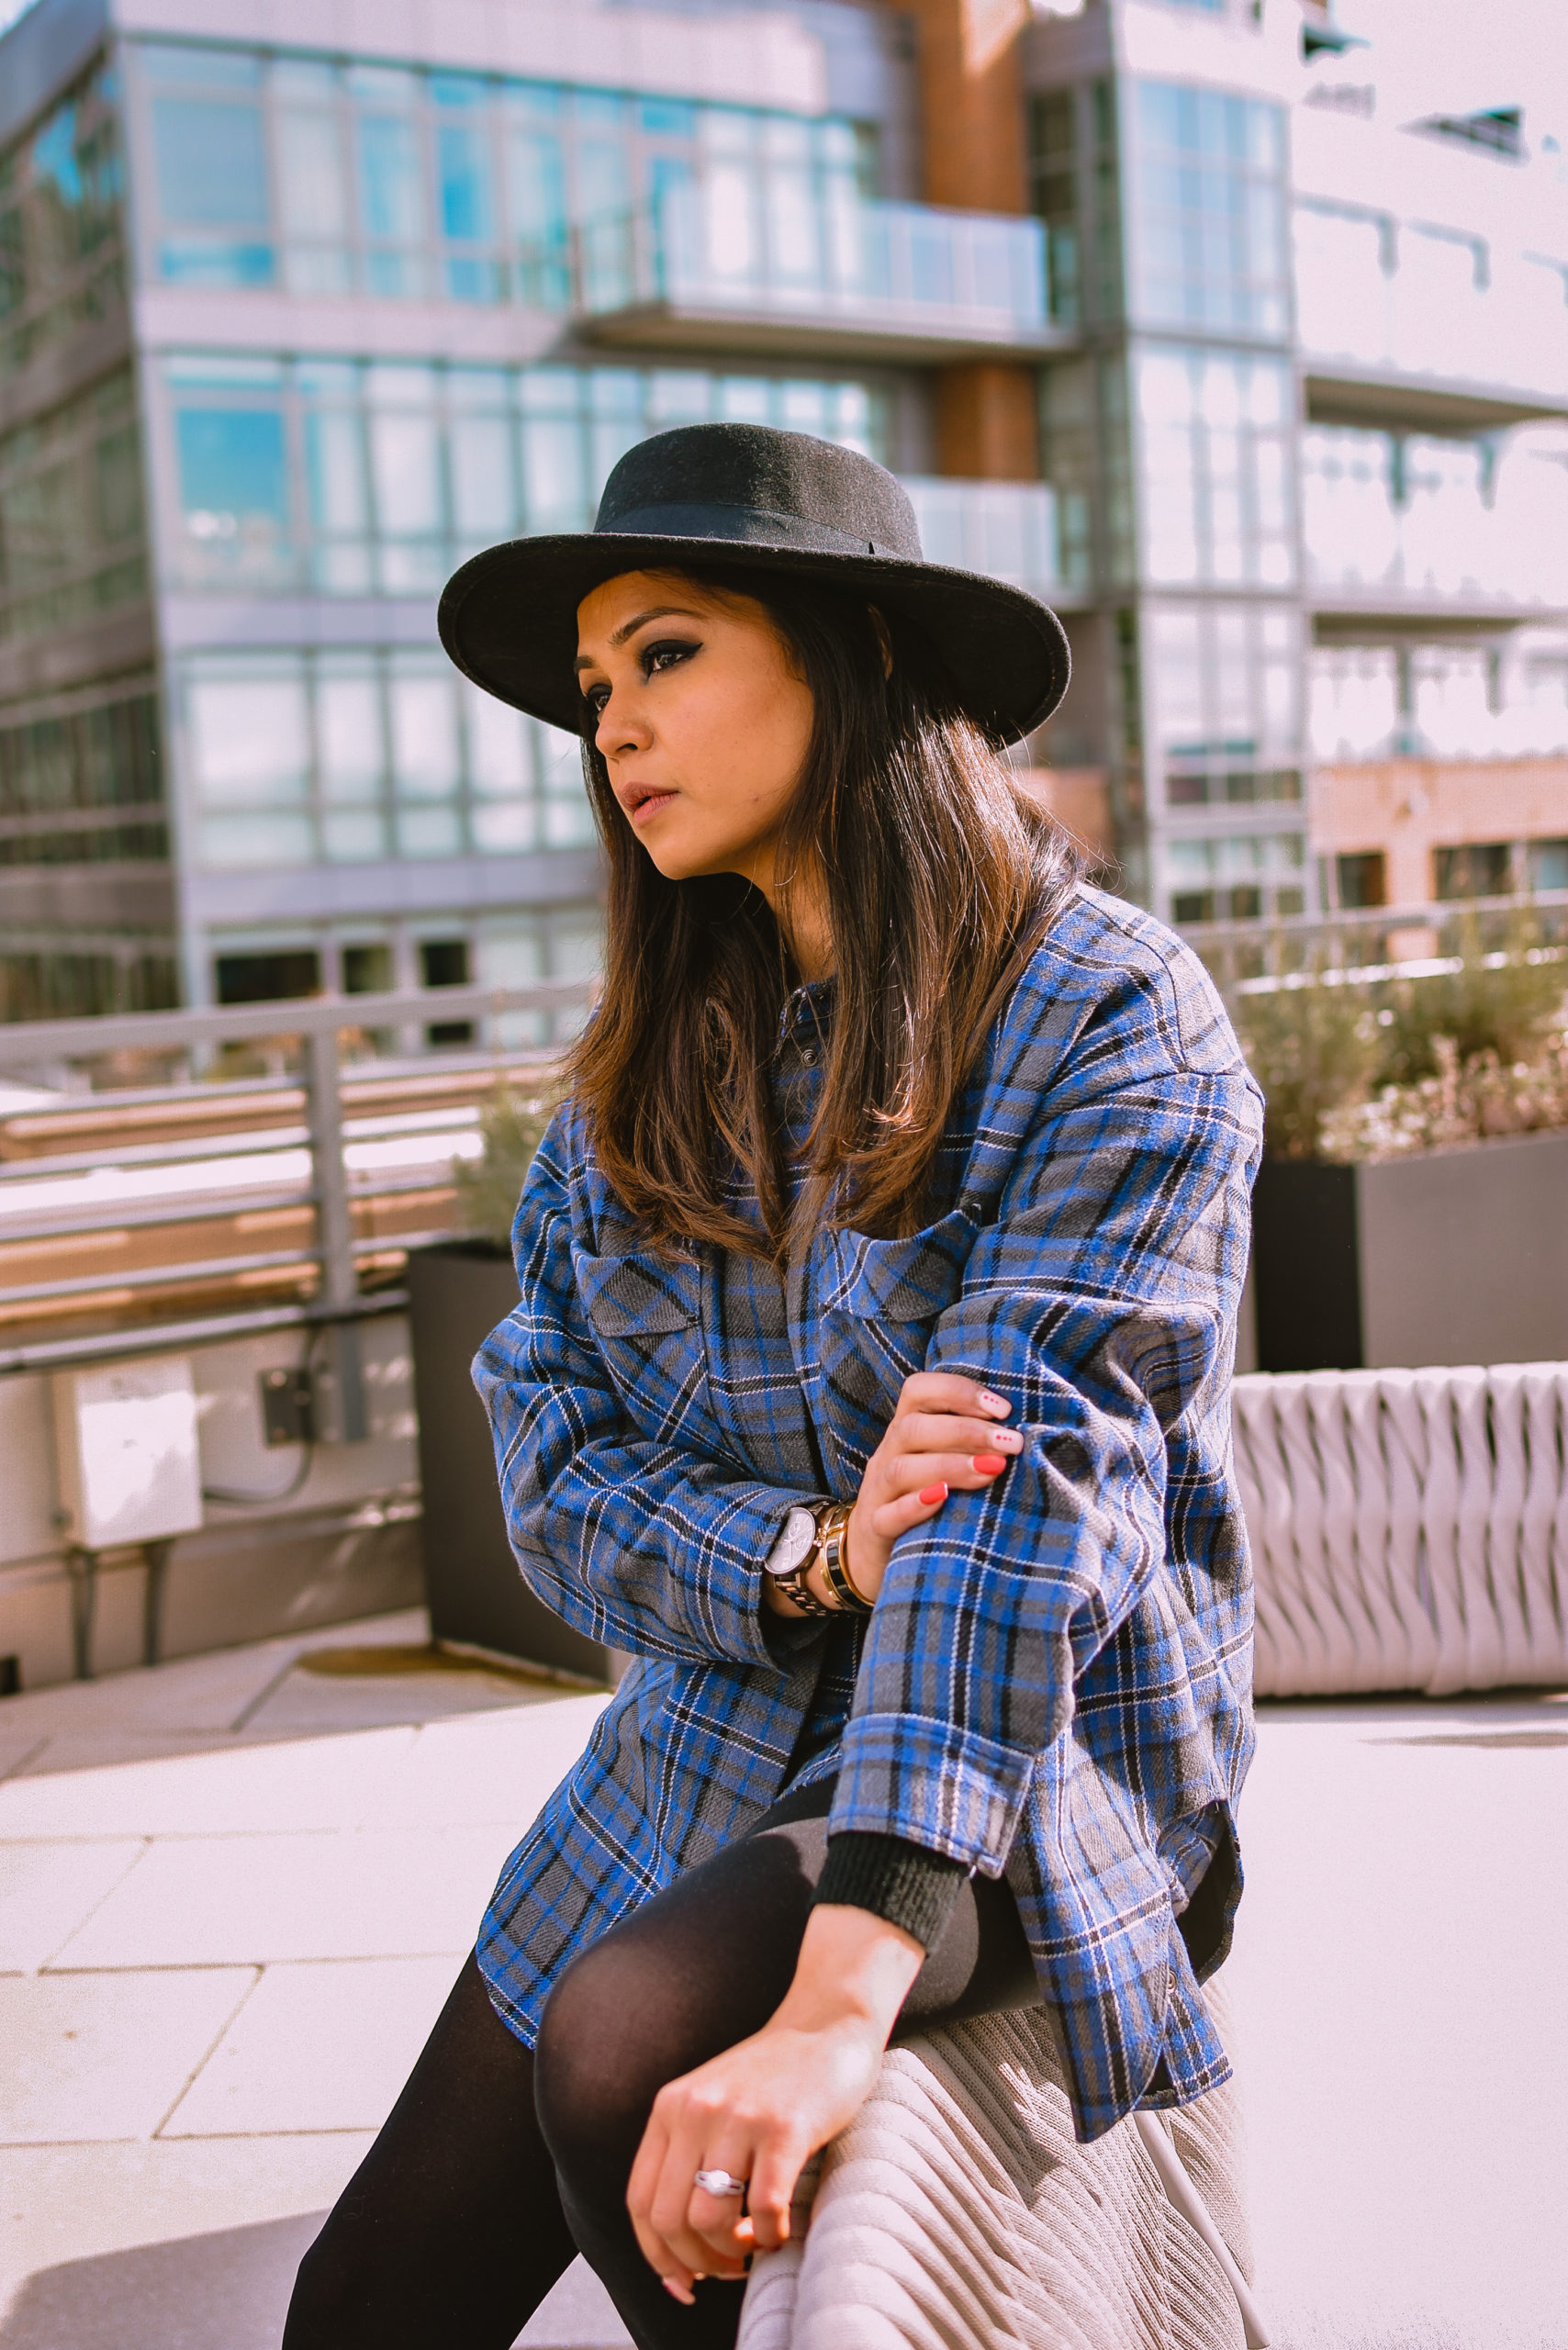 how to stay productive in lockdown, work from home tips, shacket look, plaid shorts and jacket look, outfit of the day, myriad musings, saumya Shiohare 